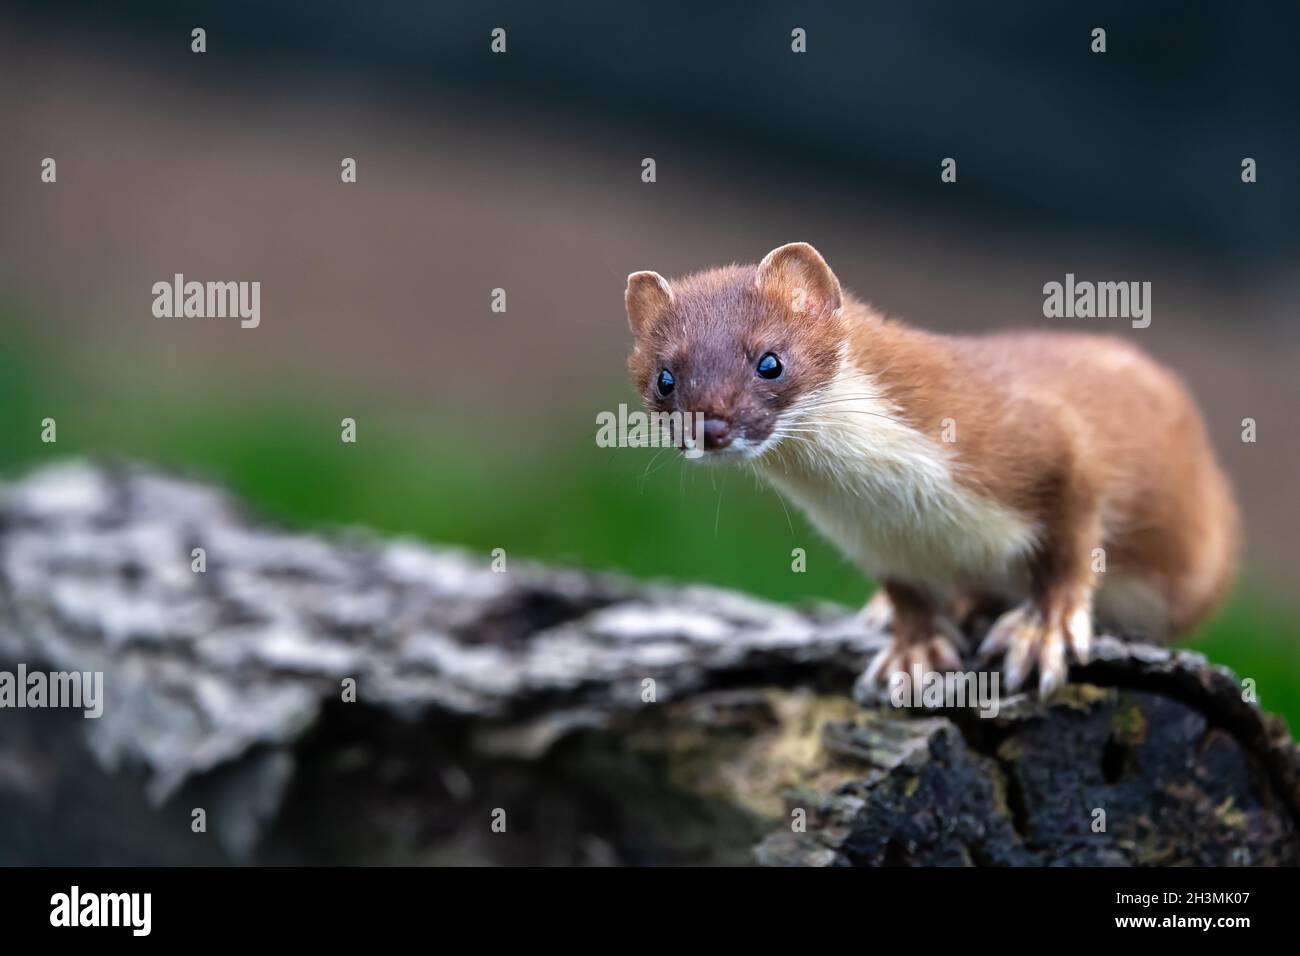 A Stoat perched on a log in its enclosure at the British Wildlife Centre in Surrey, England Stock Photo